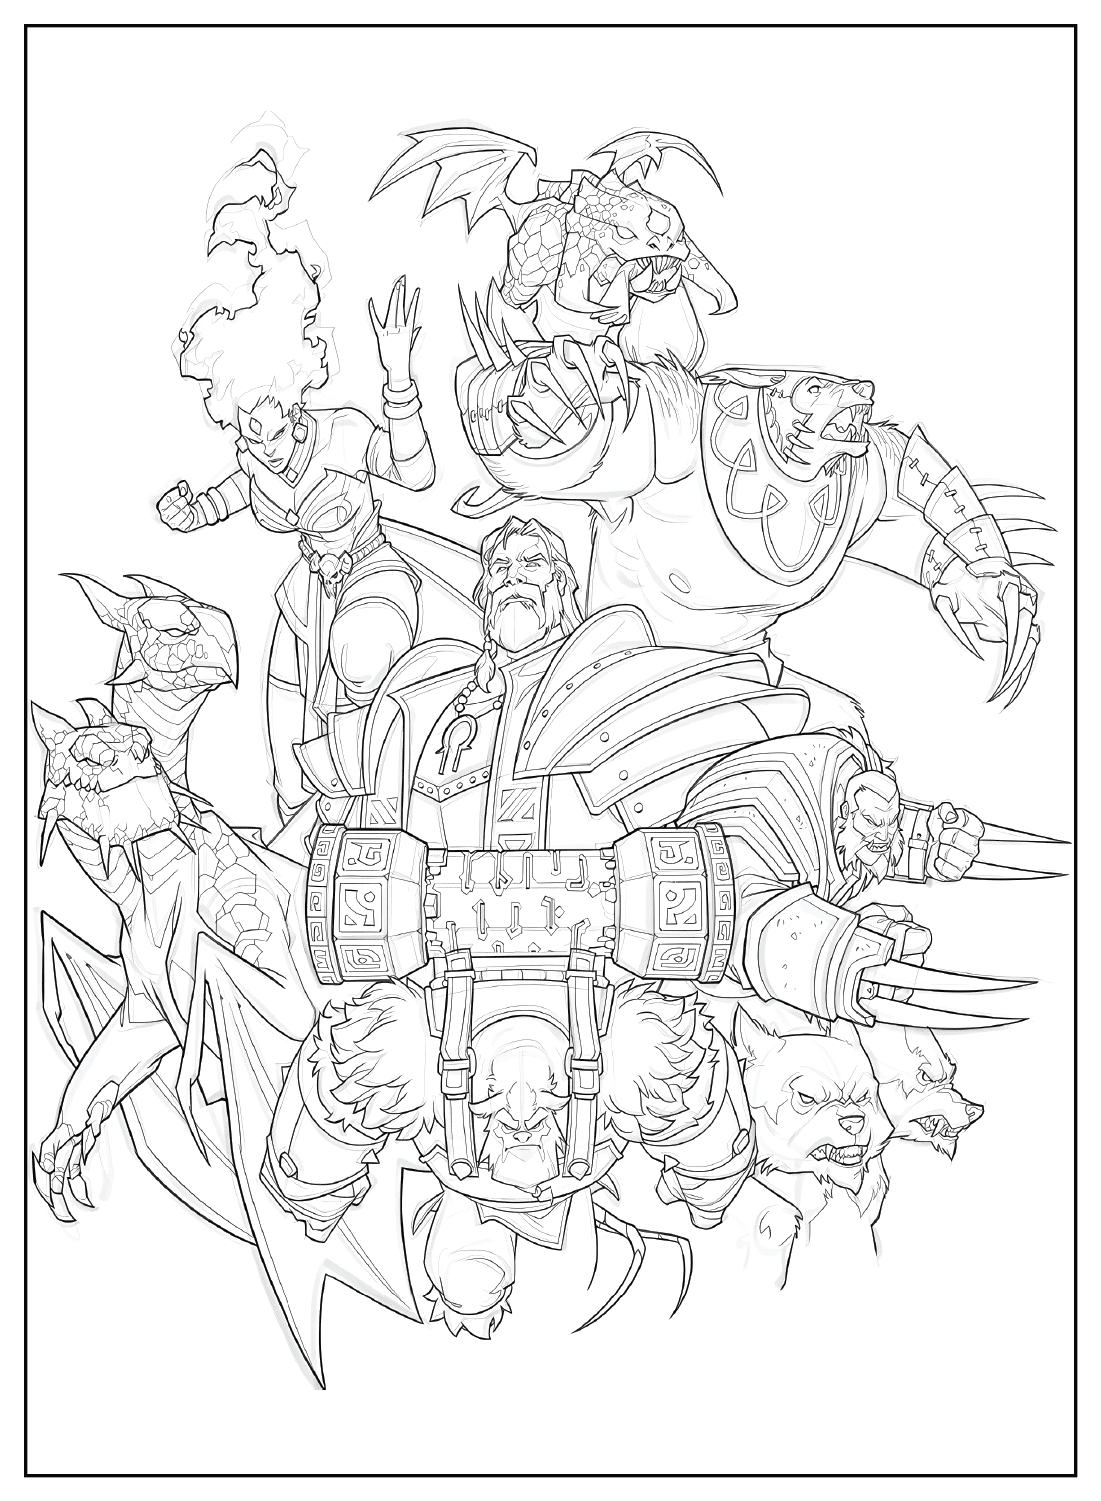 Dota 2 Strong Team Coloring Page from Dota 2